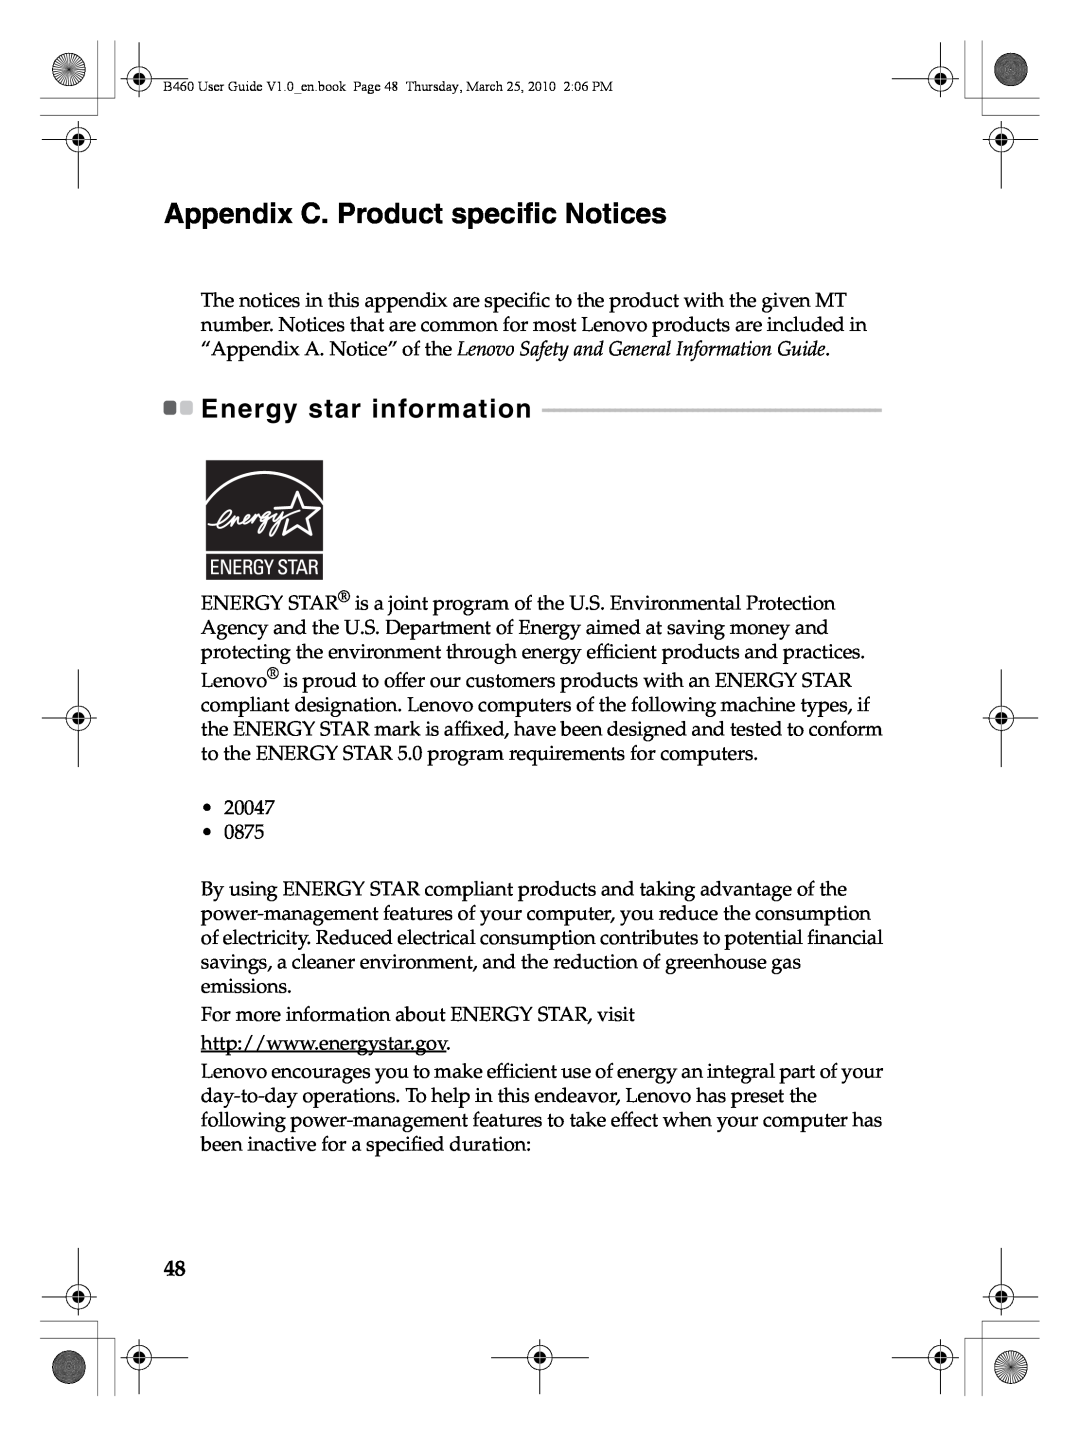 Lenovo B460 manual Appendix C. Product specific Notices, Energy star information 